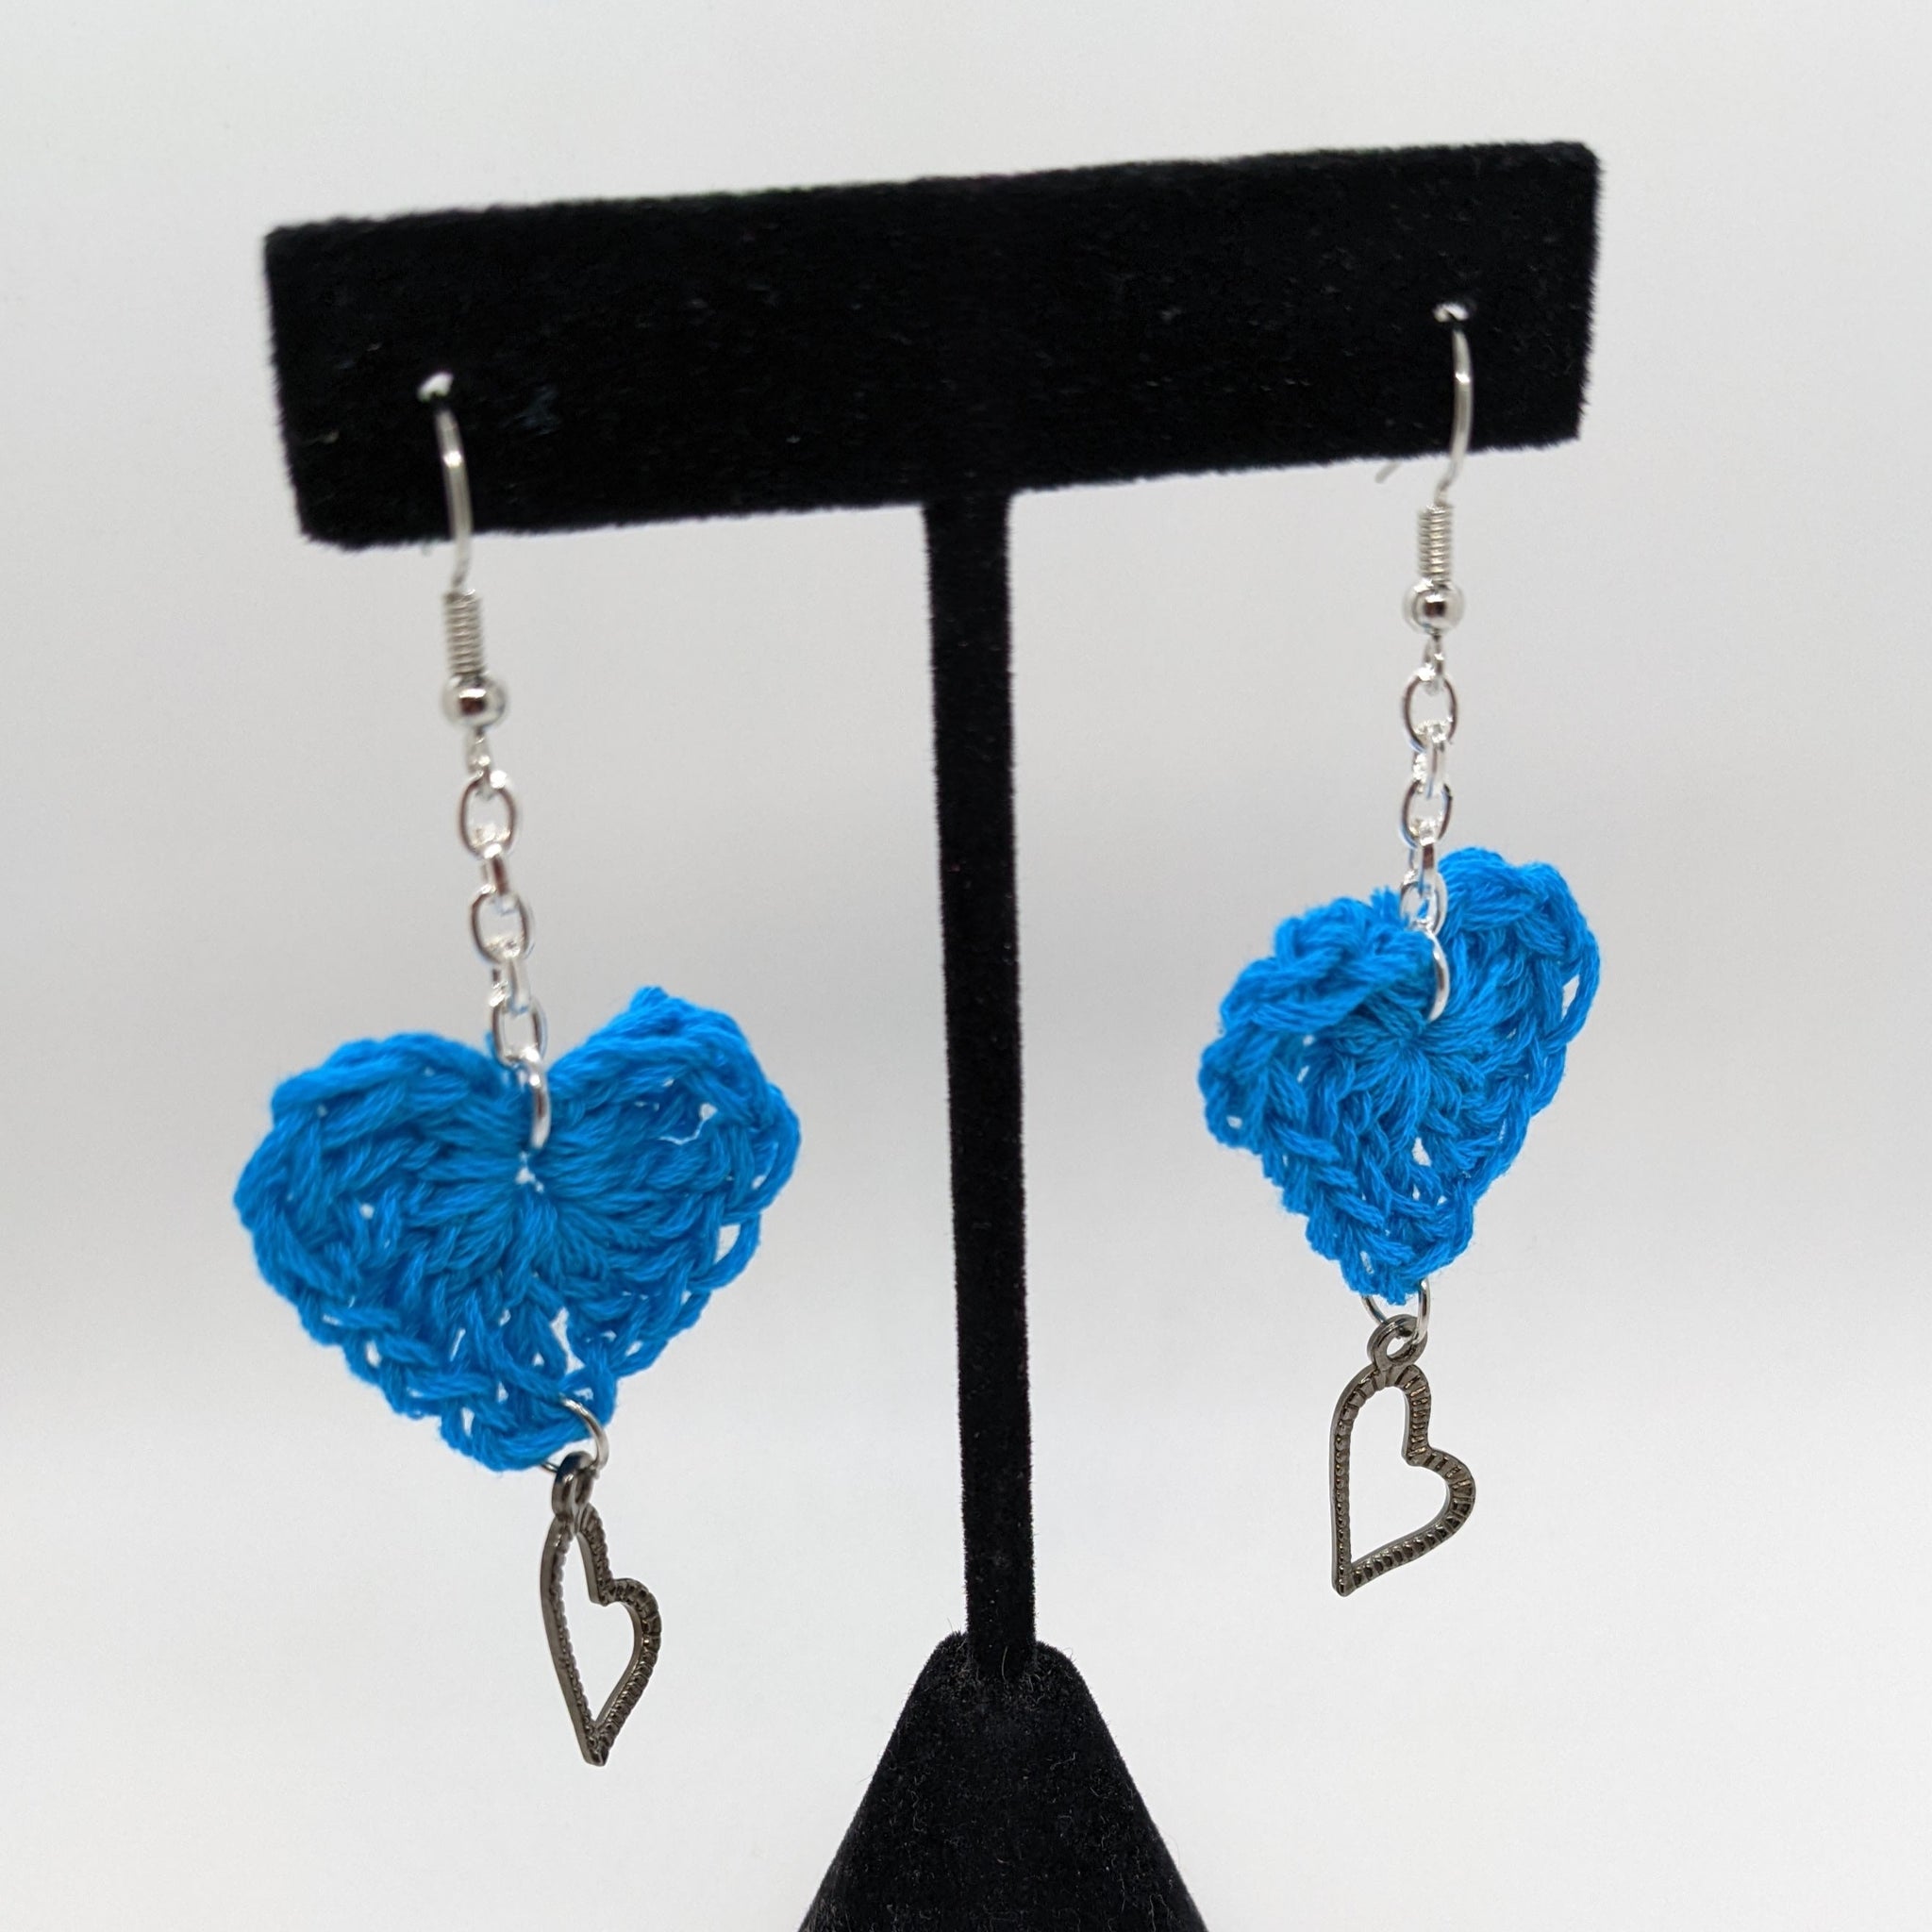 Crocheted Small Hearts with Charms - Several options available